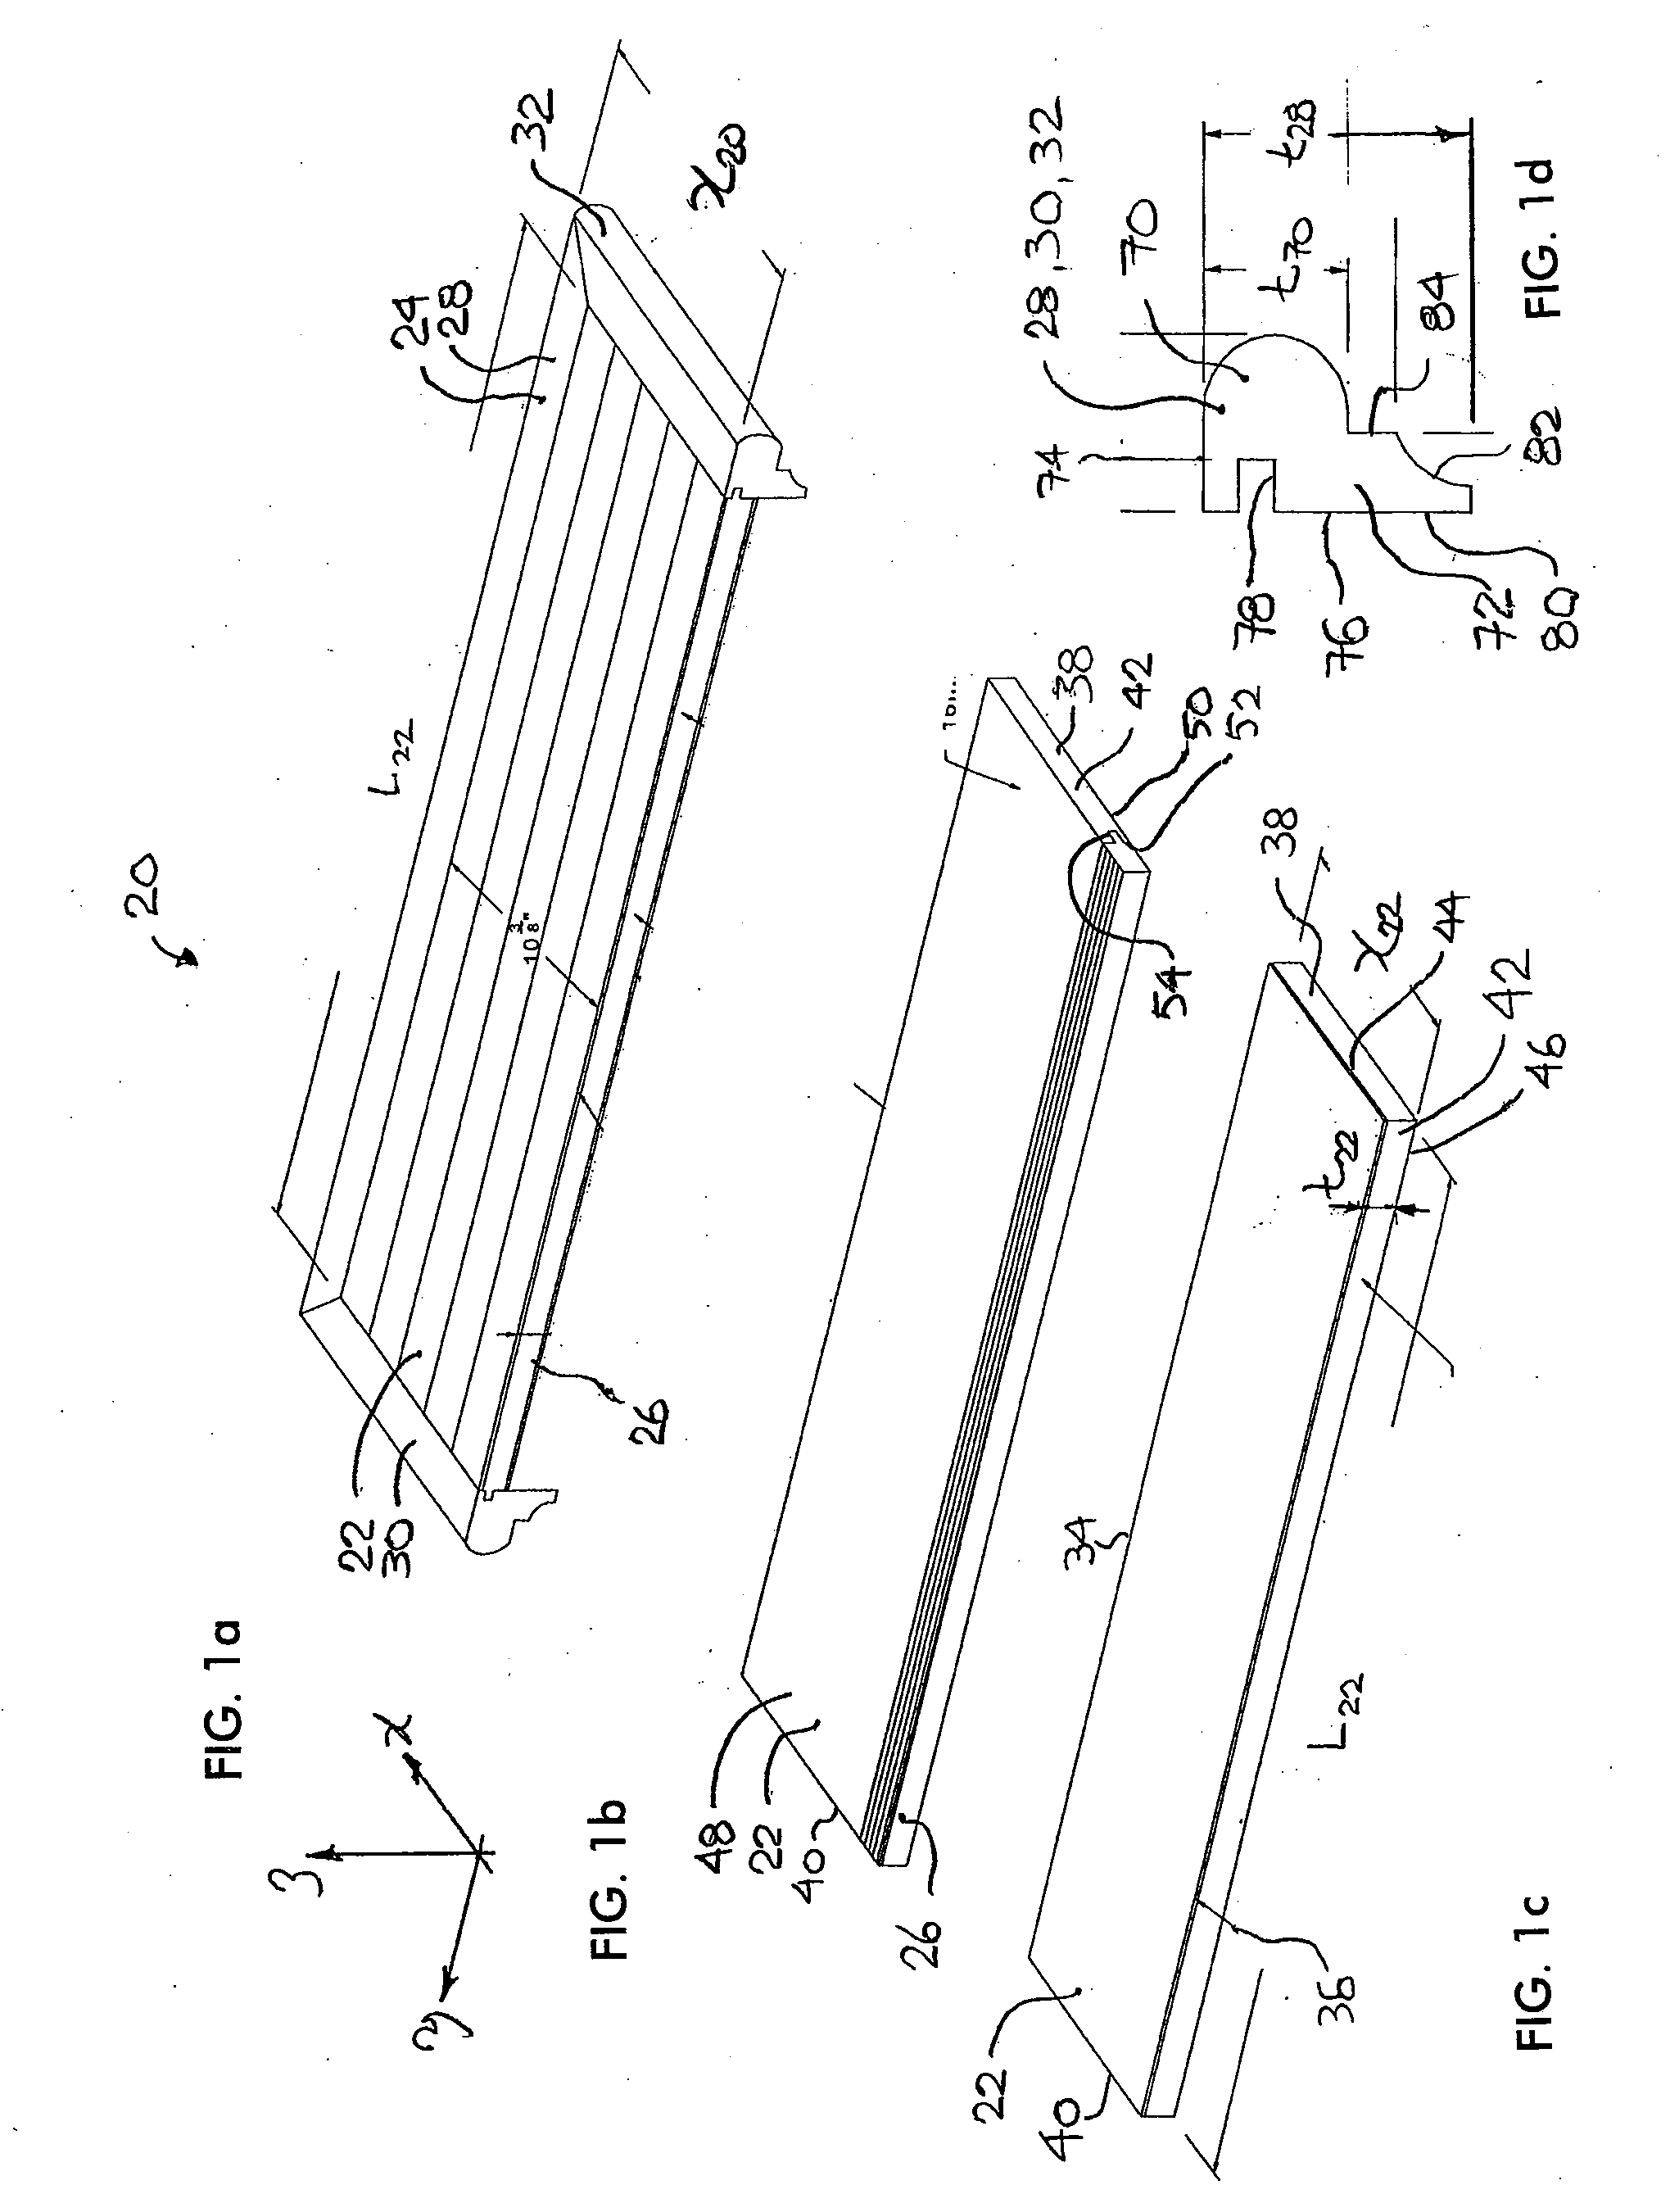 Stair tread assembly and method